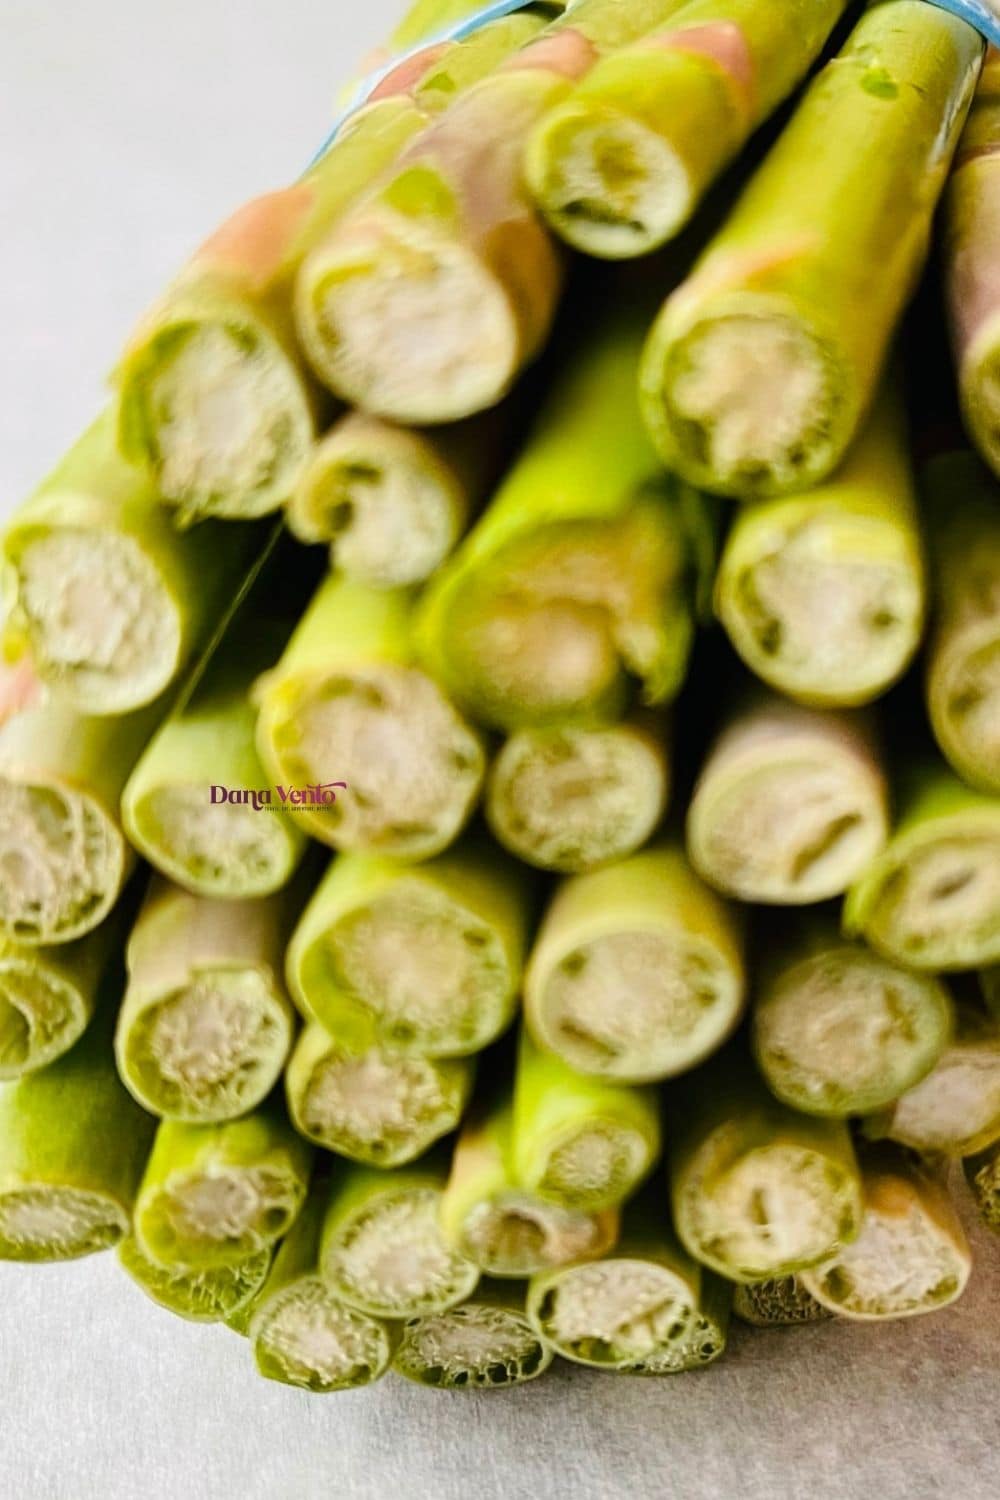 these are the woody ends of asparagus